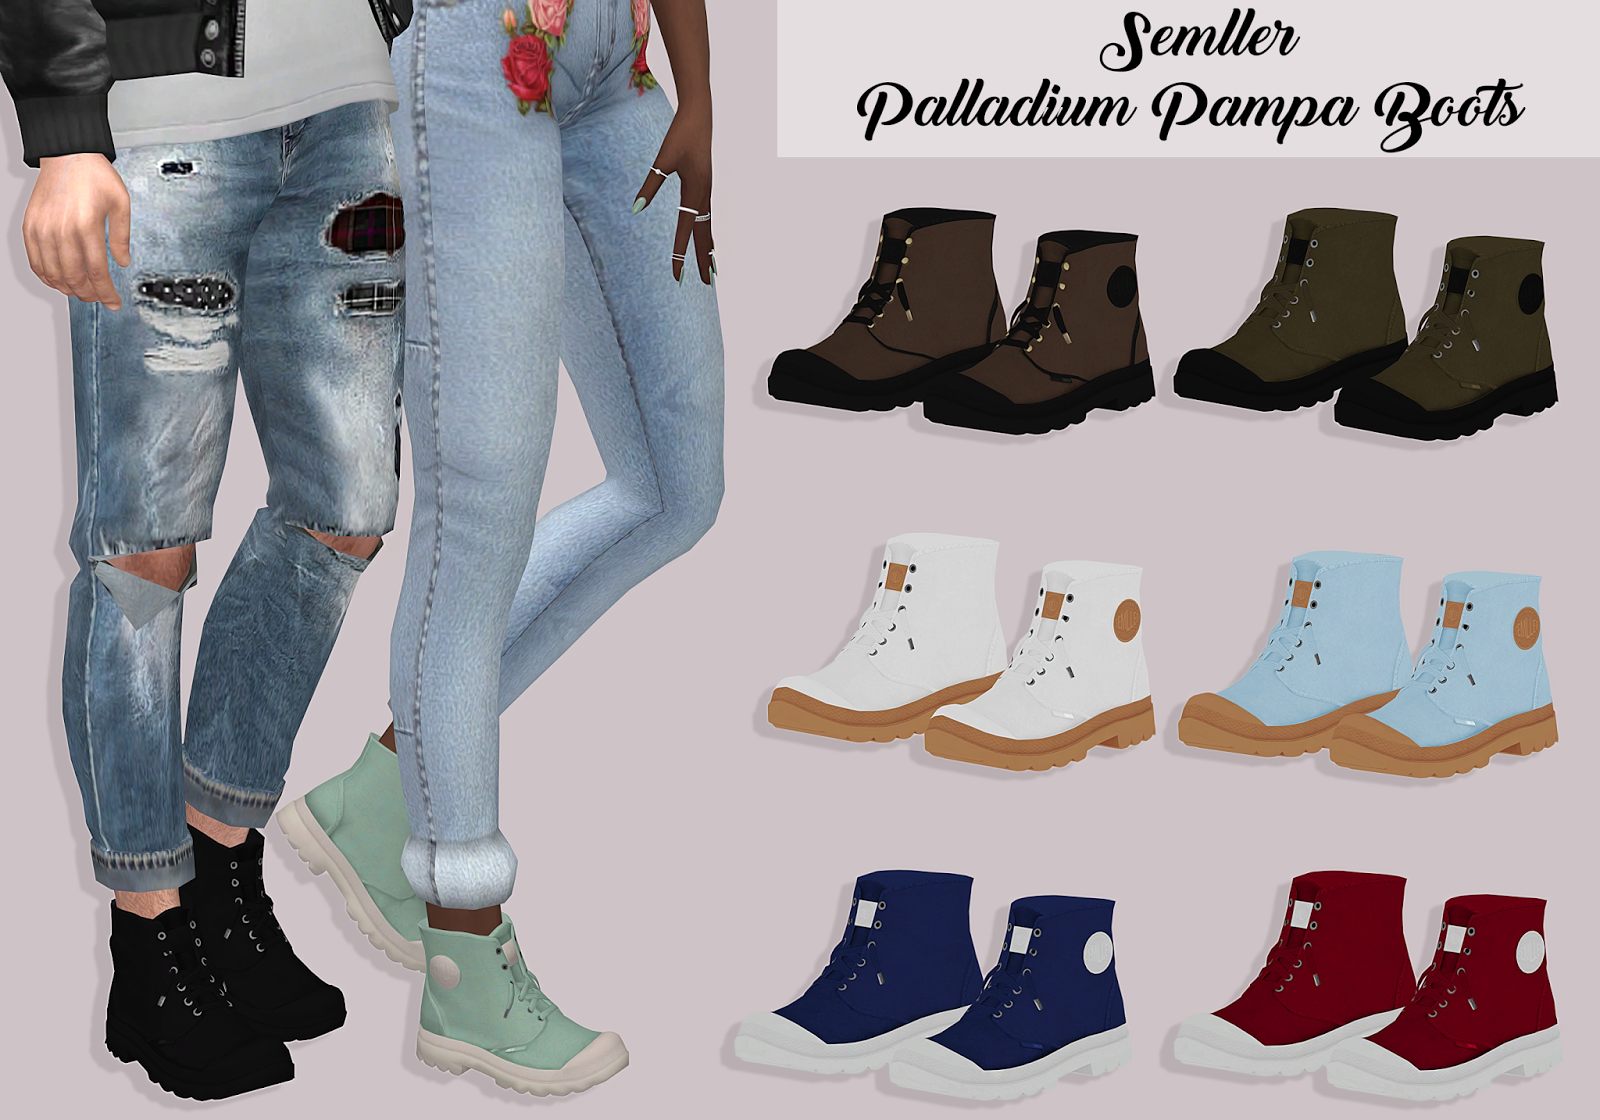 The sims 4 shoes - plmster